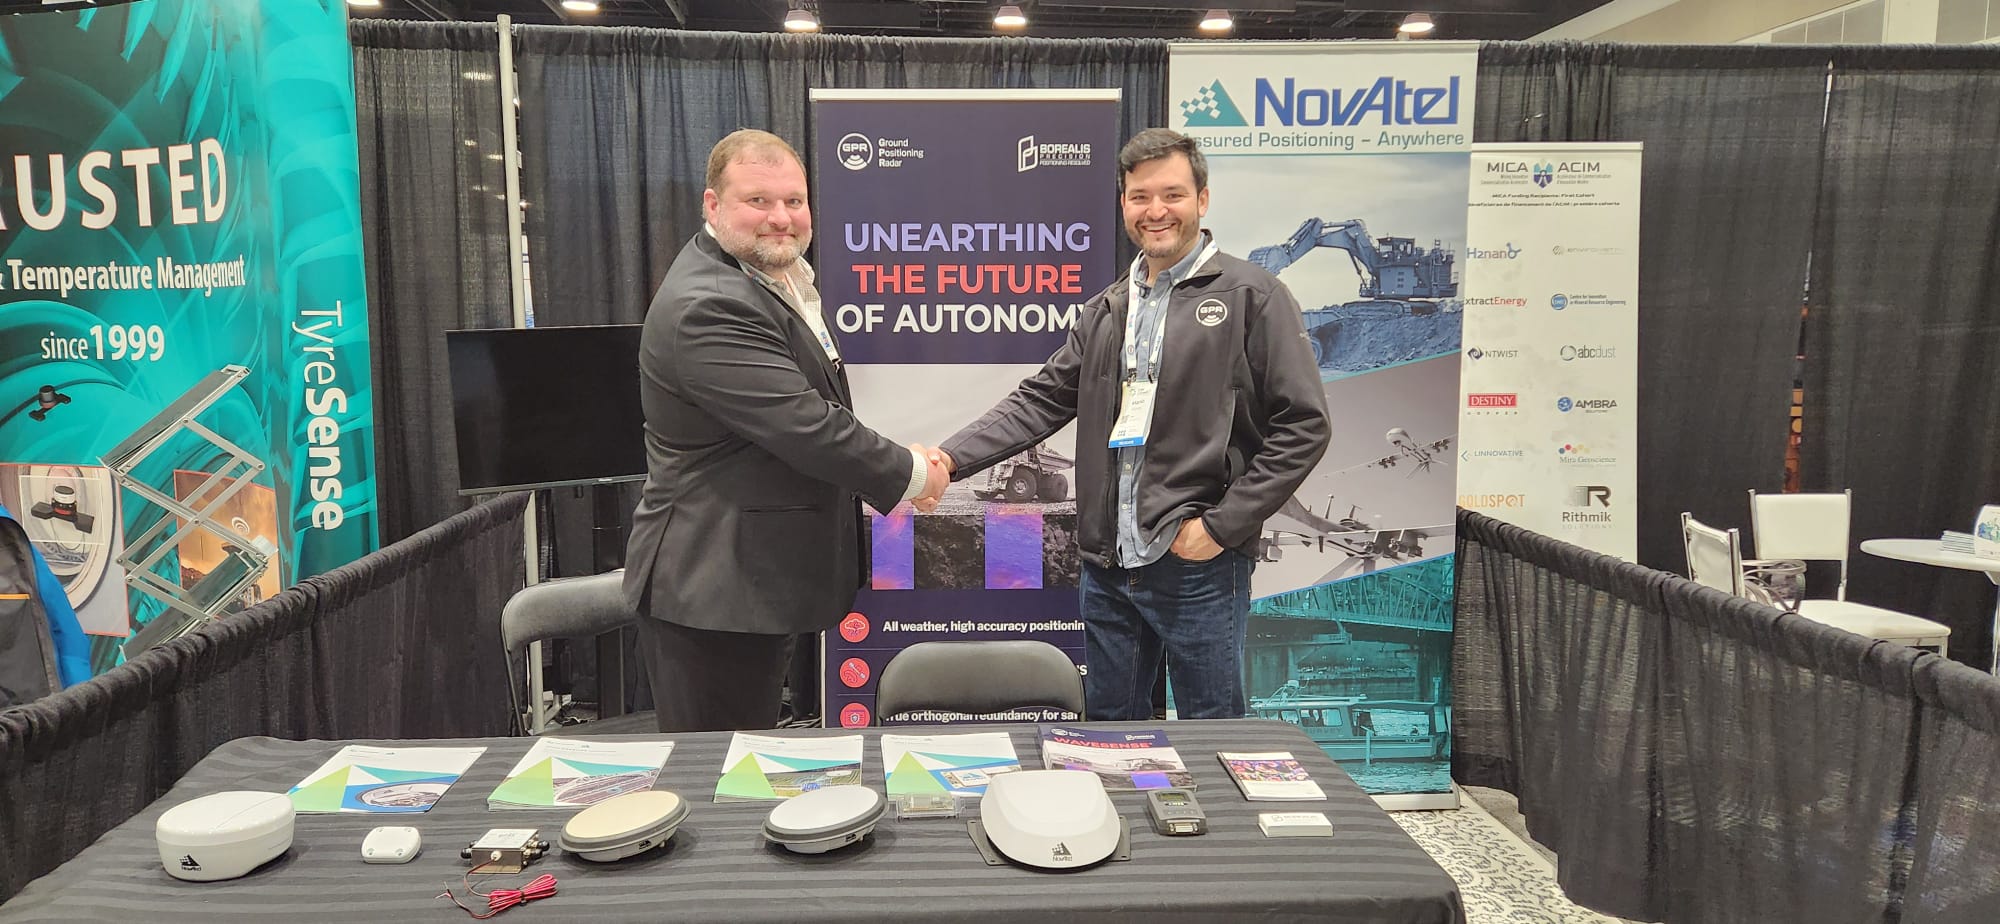 GPR and Borealis Precision sign agreement to provide positioning technology for autonomy